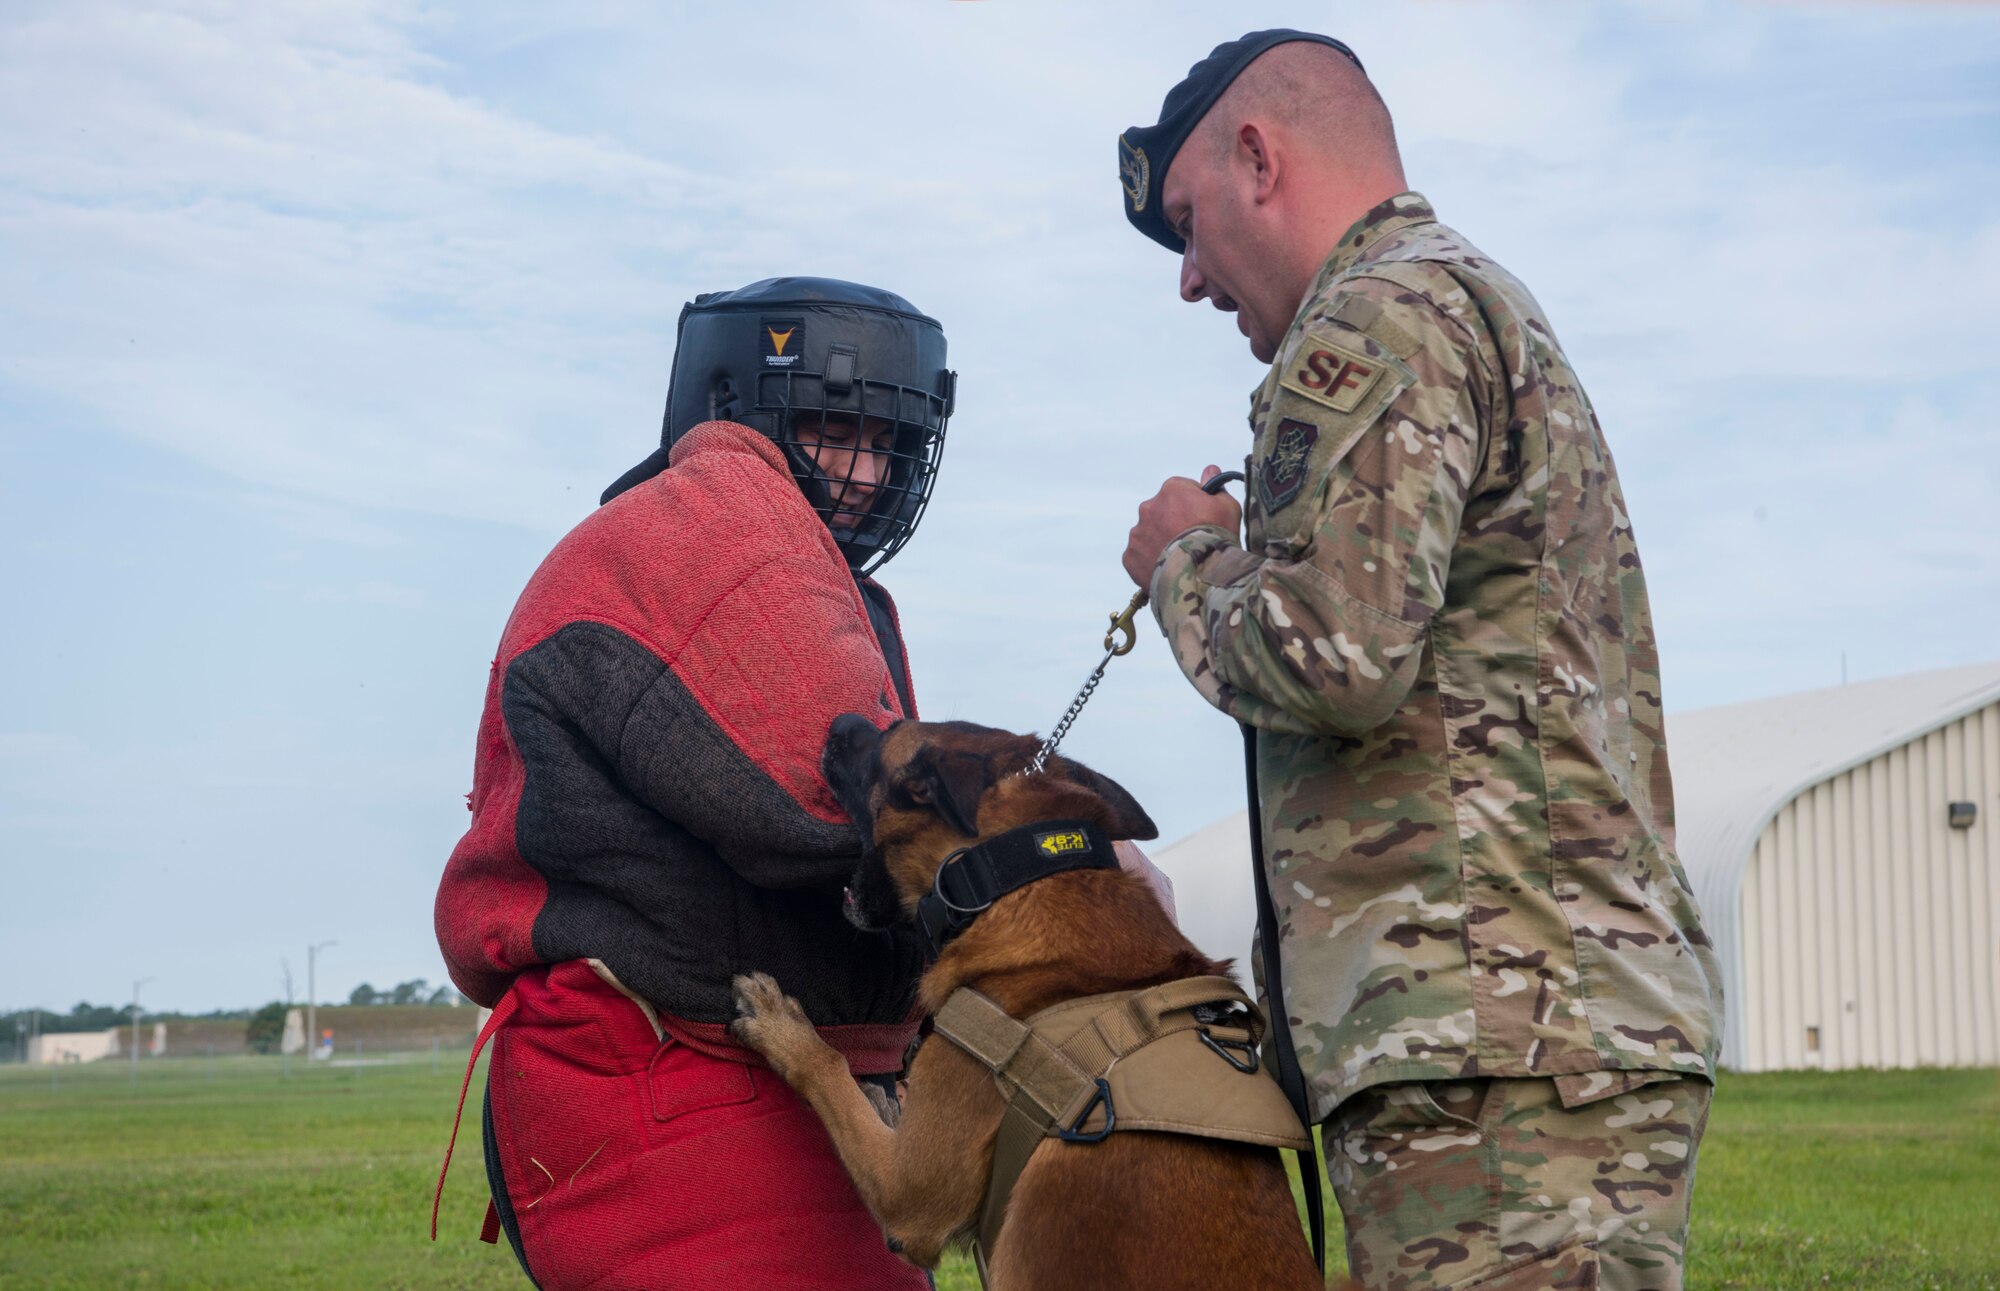 Tech. Sgt. Josue Silva, an 18th Air Force (AF) enlisted aide from Scott Air Force Base, Ill., participates in a bite training exercise with Tech. Sgt. Matthew McElyea, the 6th Security Forces Squadron kennel master, and his log, Lleonard, at MacDill AFB, Fla., May 9, 2019.